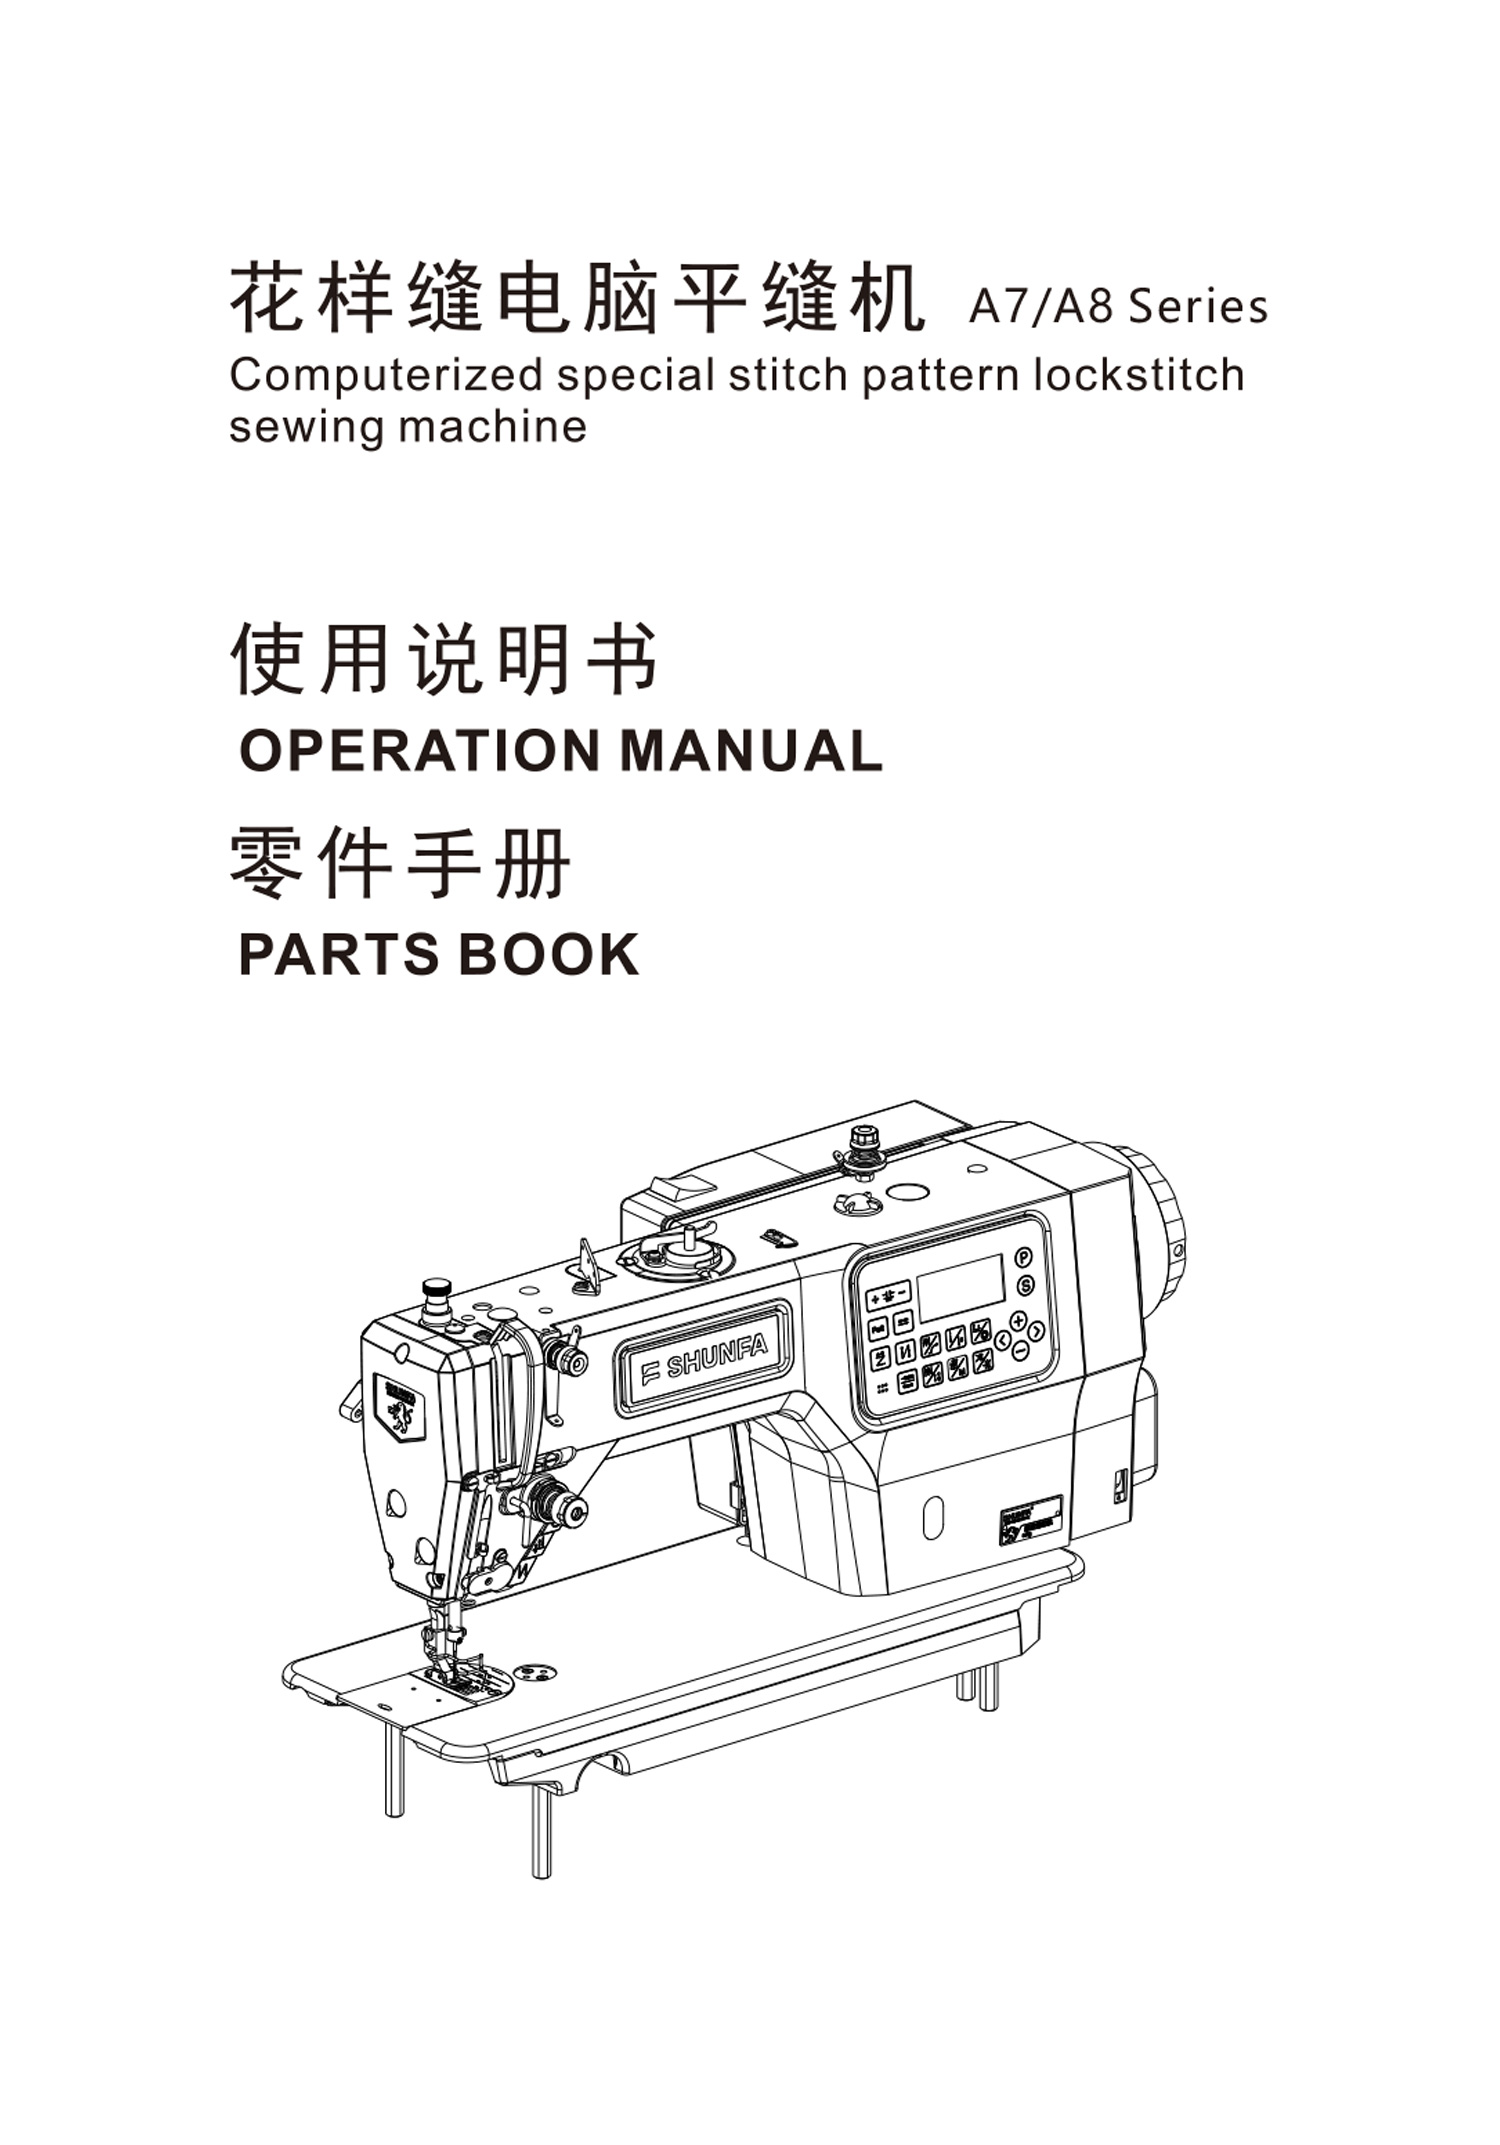 Upgraded double-step-motor-drive lockstitch sewing machine (suitable for different type of fabric)